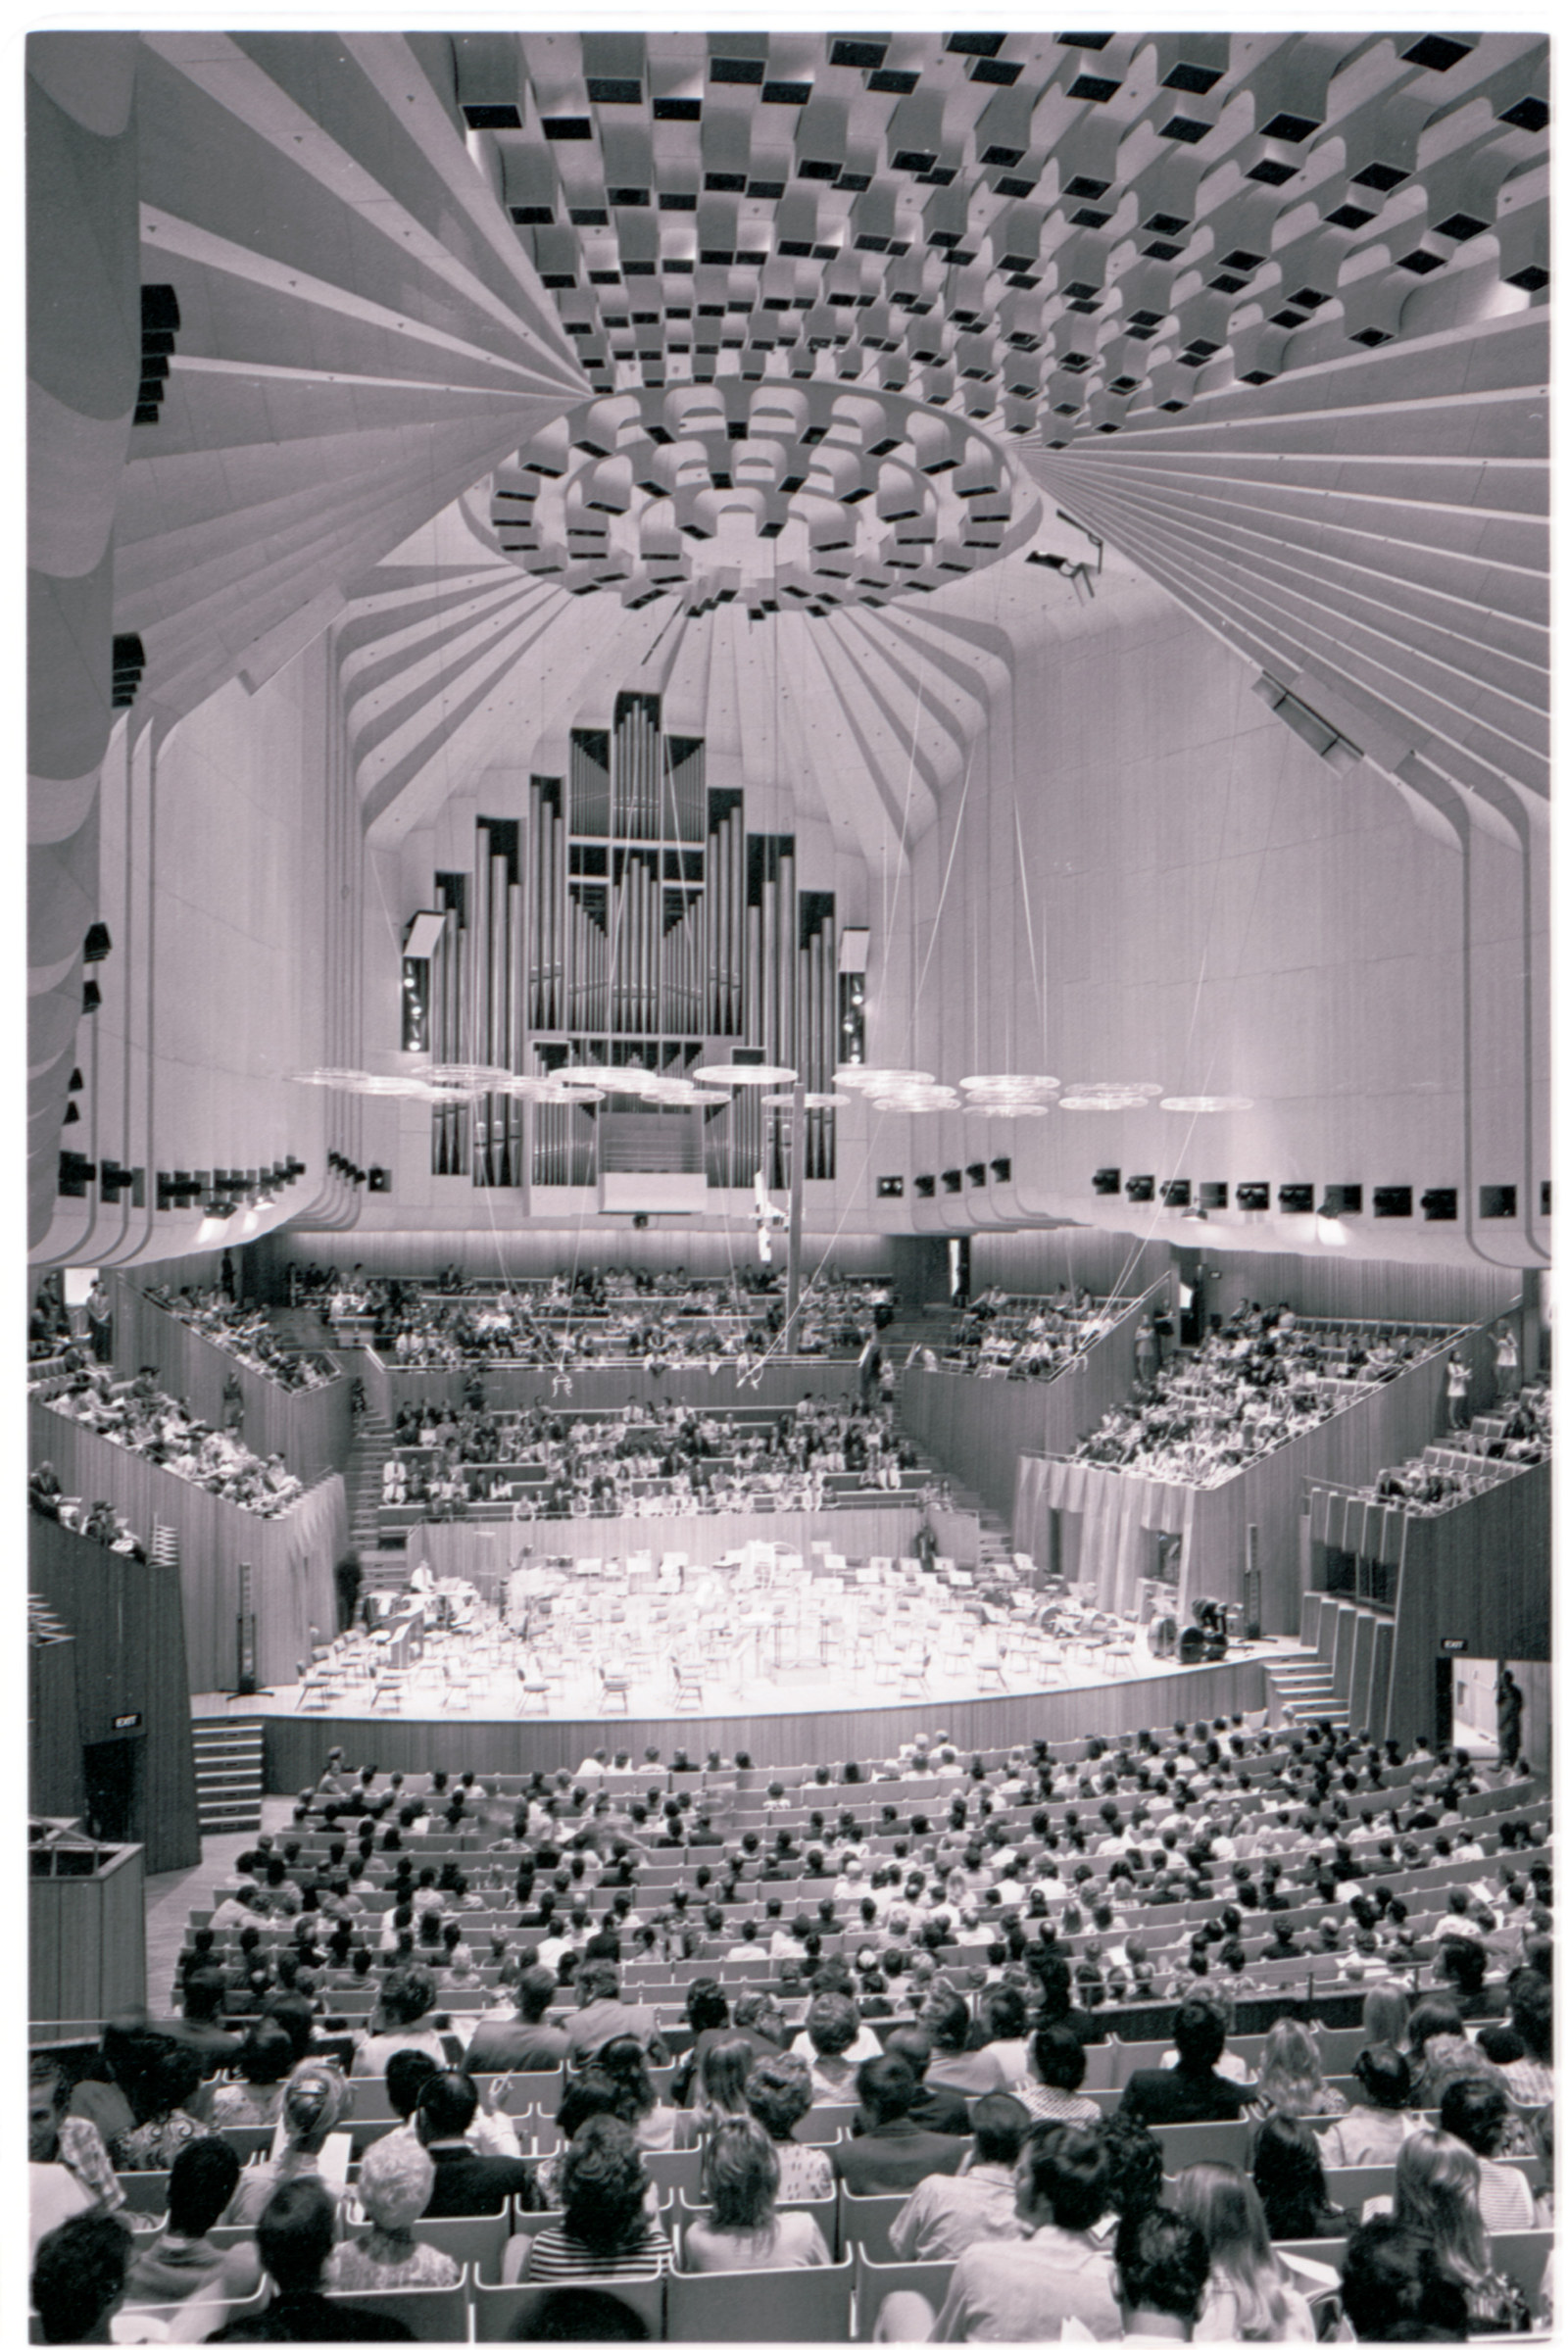 Government Printing Office 3 - 20815 - First live concert in the Sydney Opera House for the purpose of testing the acoustics [Public Works; concert halls] [17/12/1972]